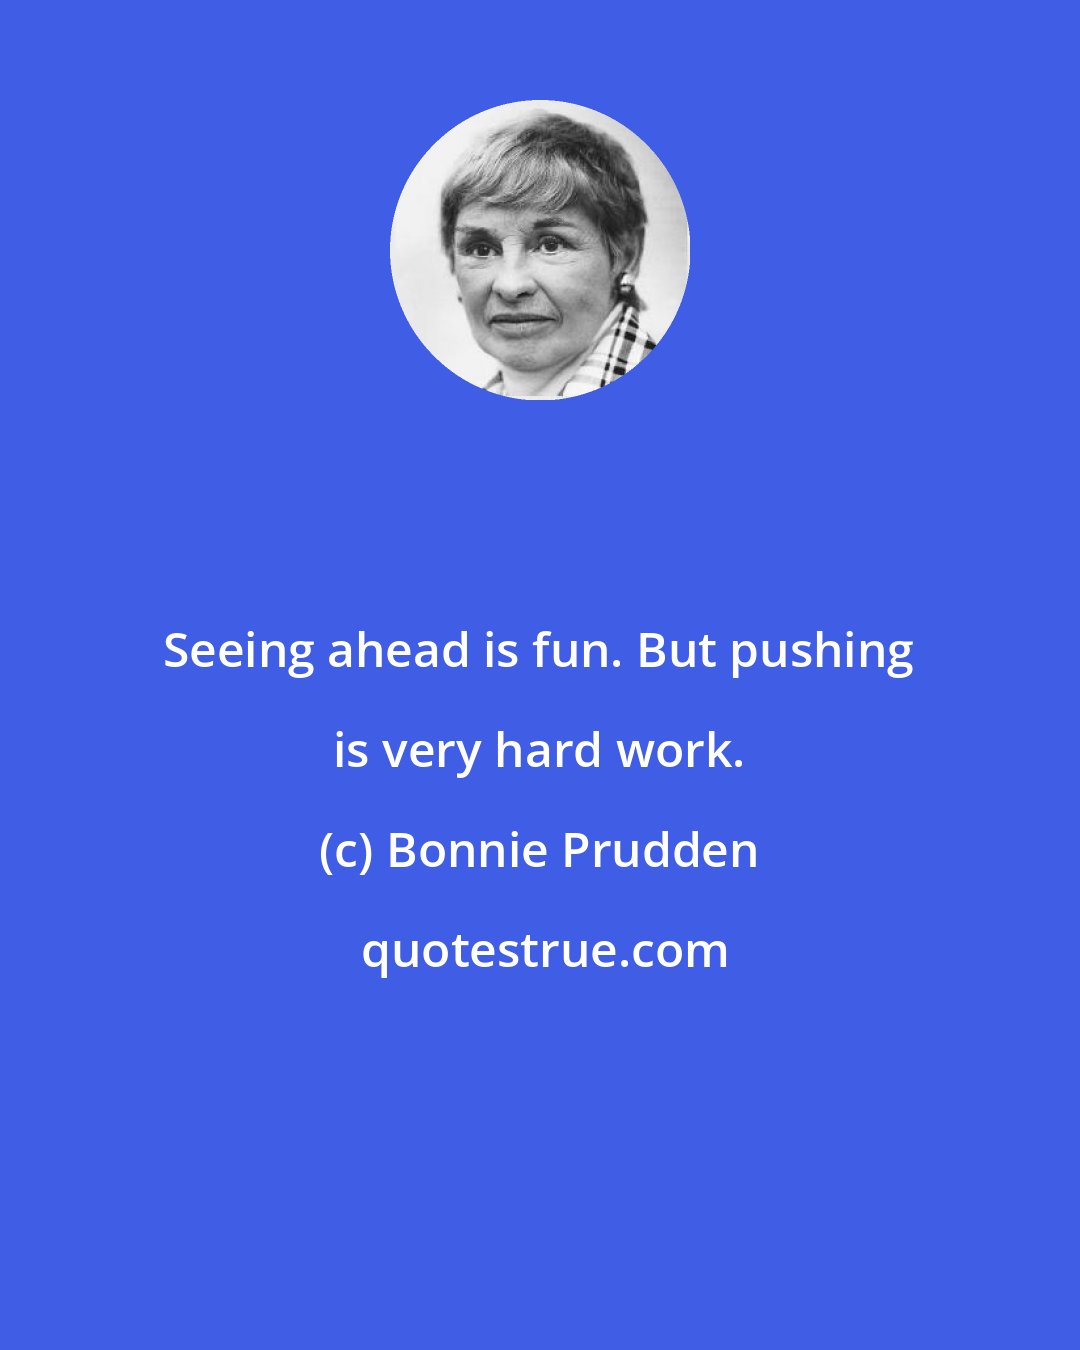 Bonnie Prudden: Seeing ahead is fun. But pushing is very hard work.